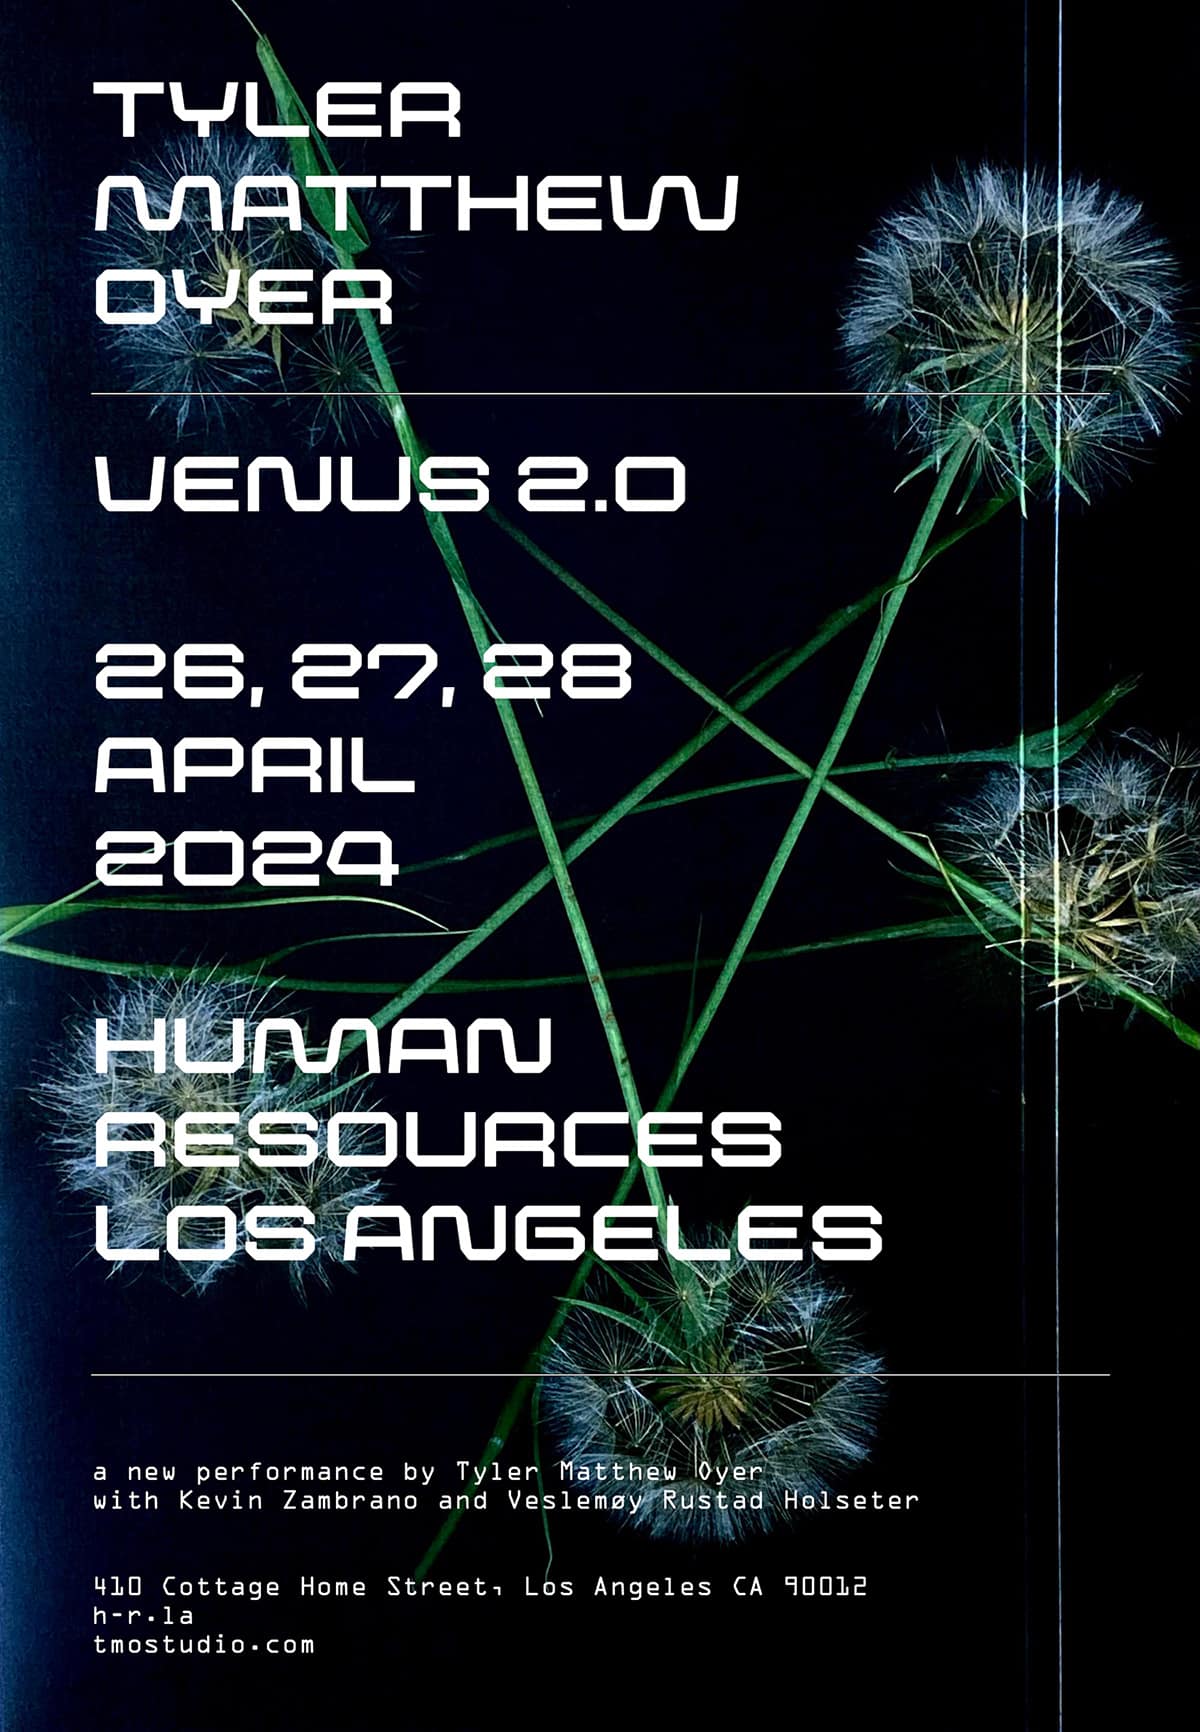 Poster for Tyler Matthew Oyer's 'Venus 2.0' featuring dandelions arranged to form a star shape